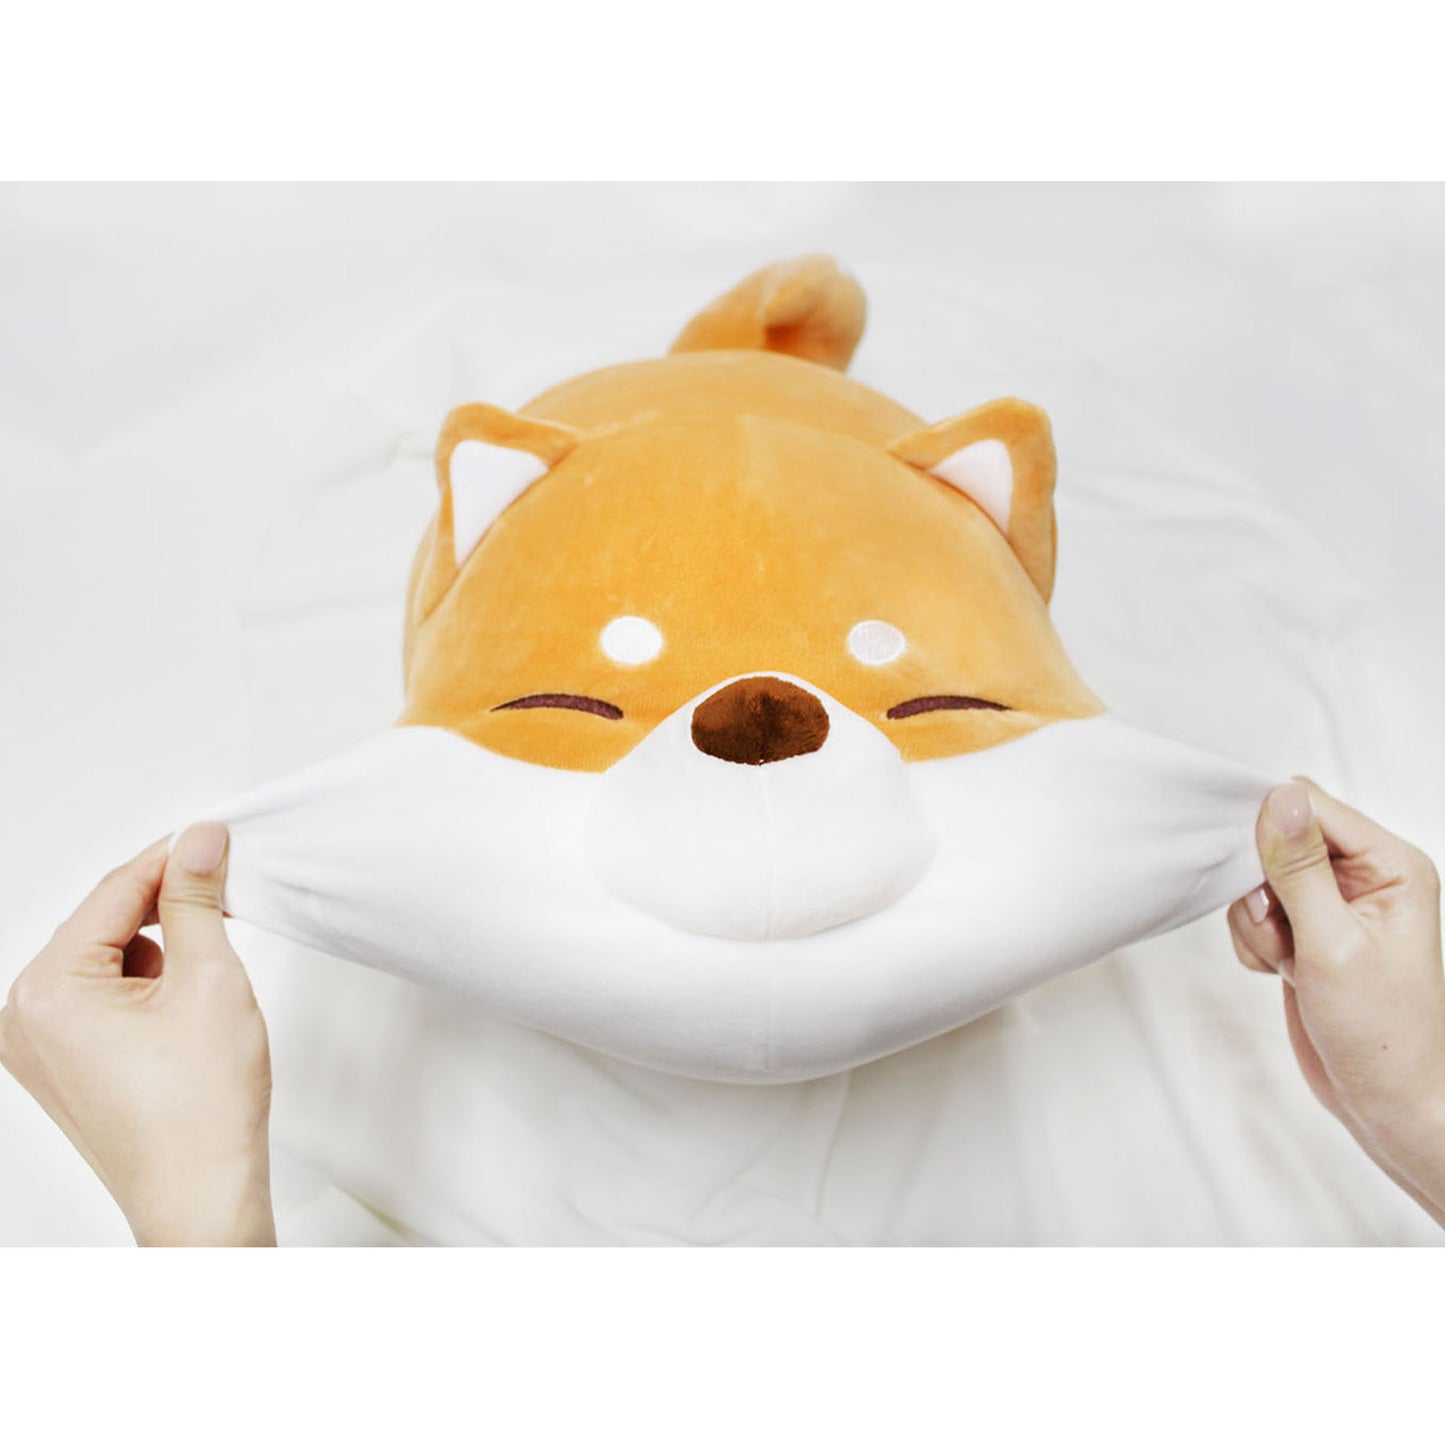 Front view of model stretching Shiba cushion's cheeks on a white blanket.